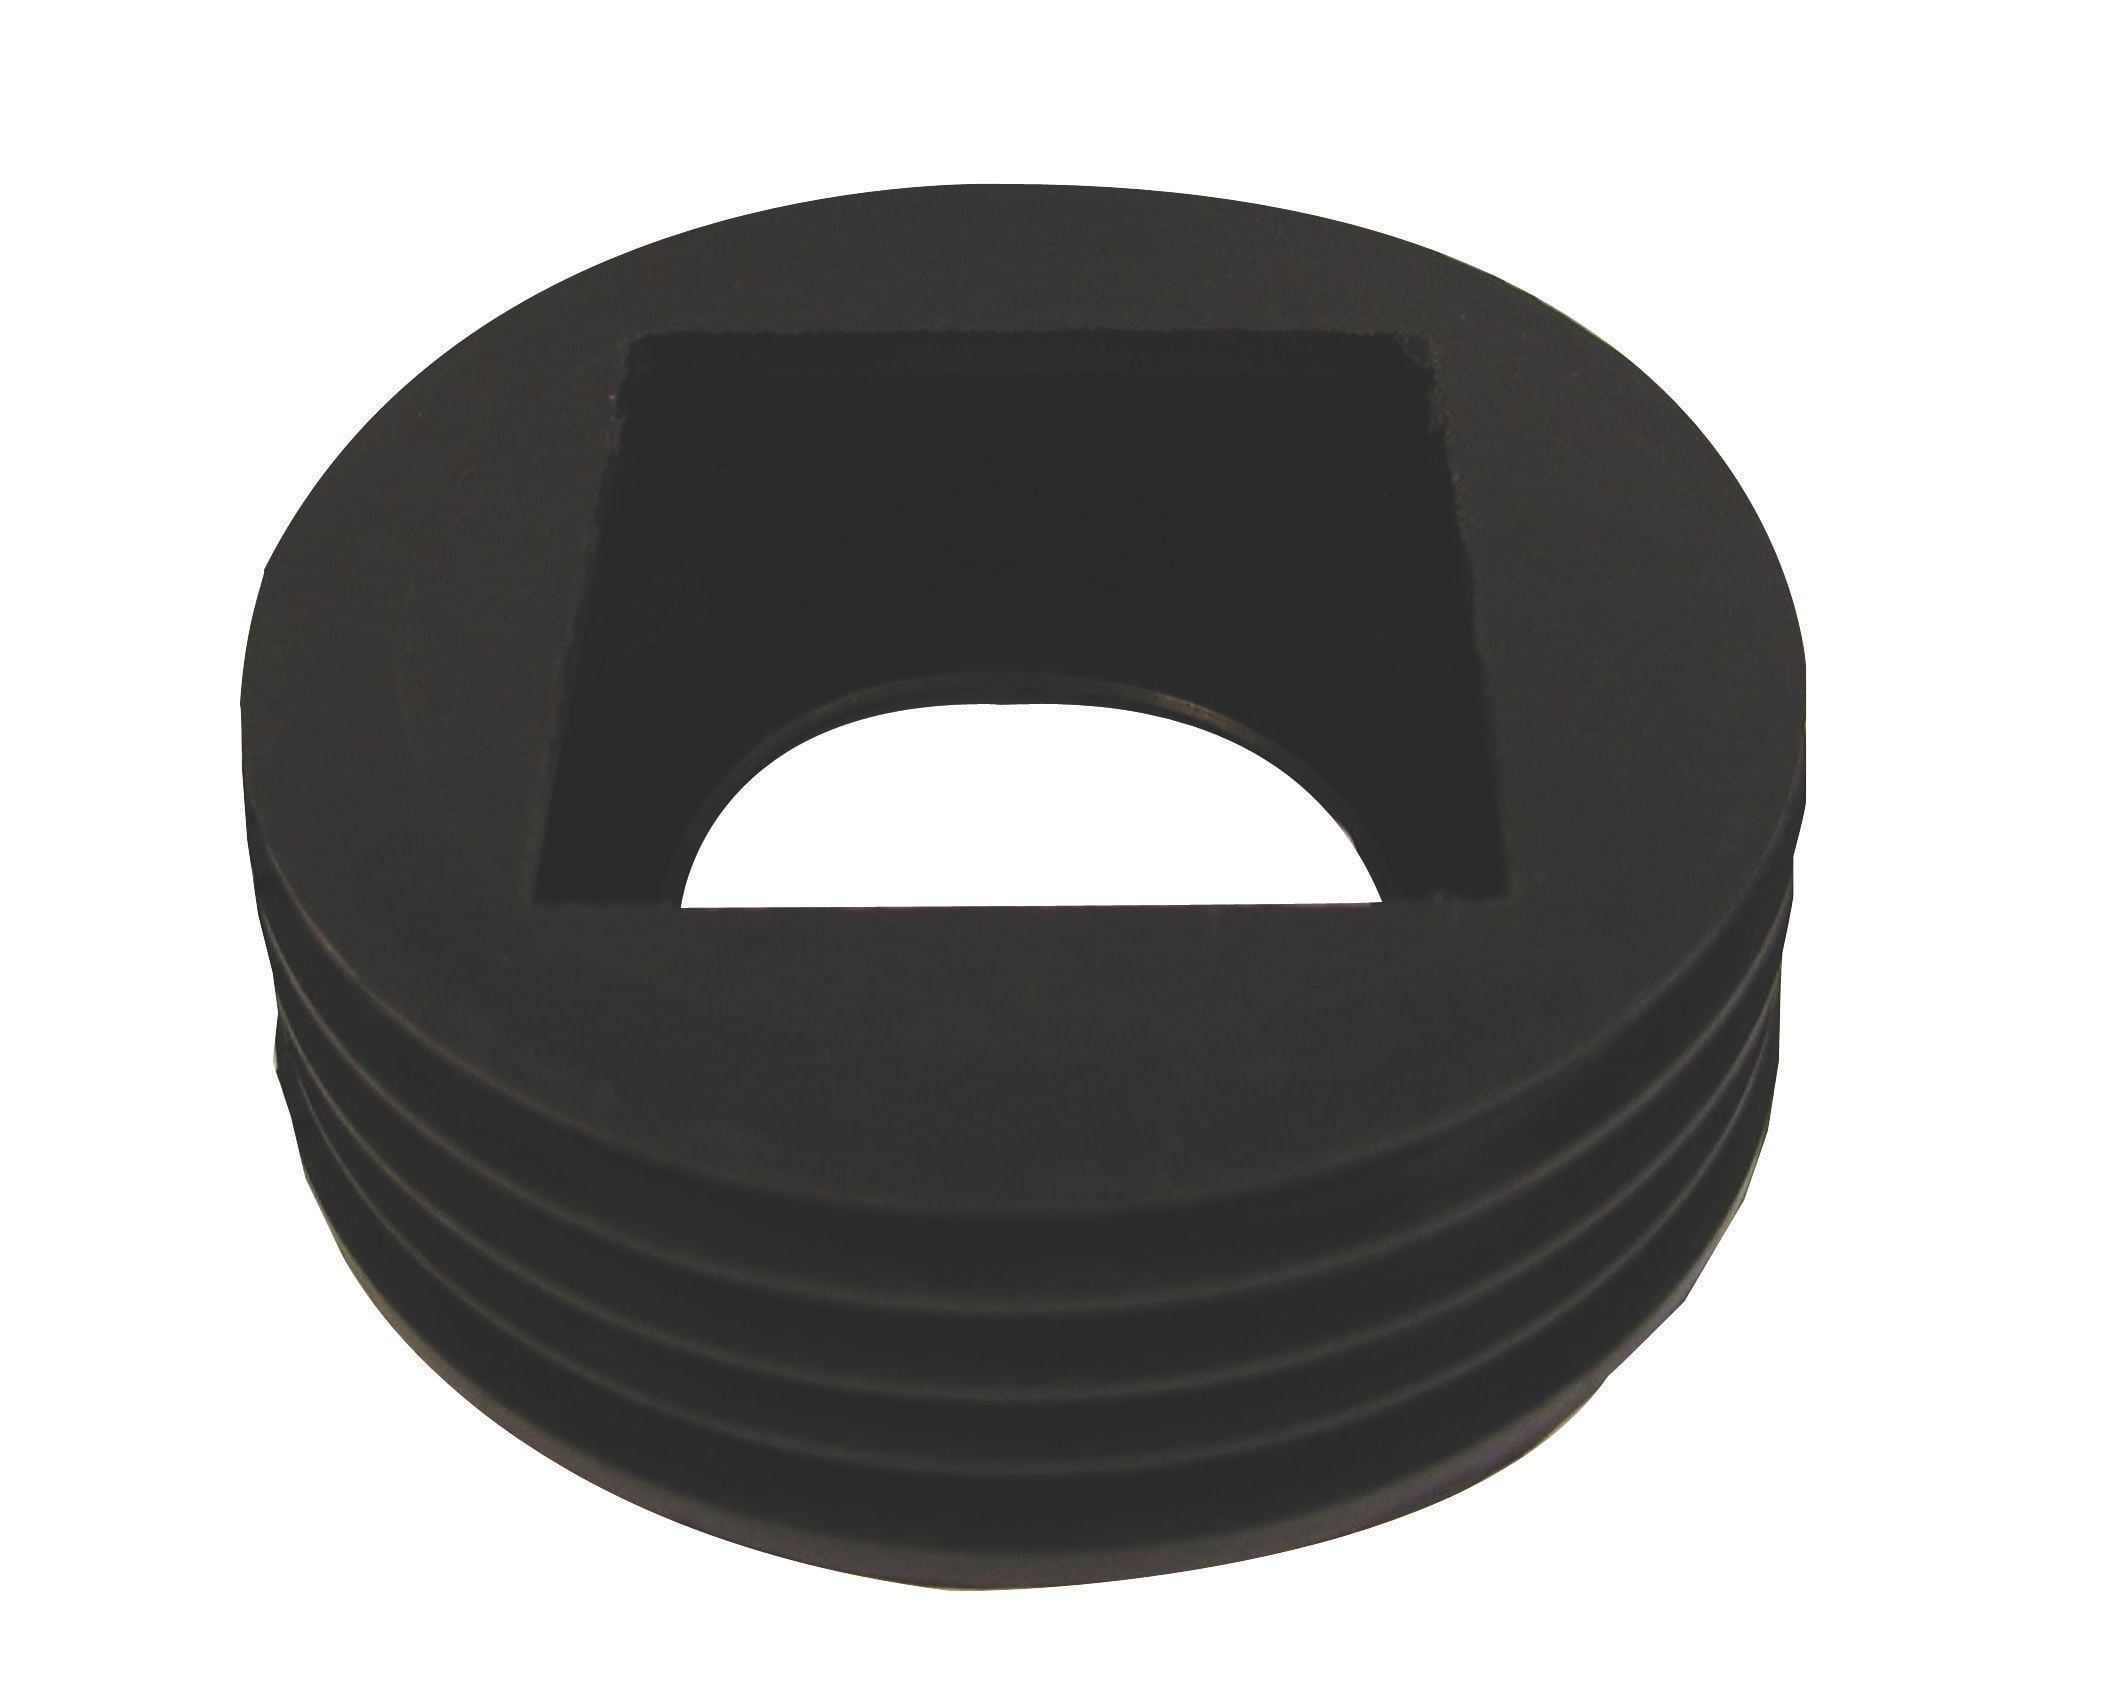 product picture of univesal rainwater adaptor rubber